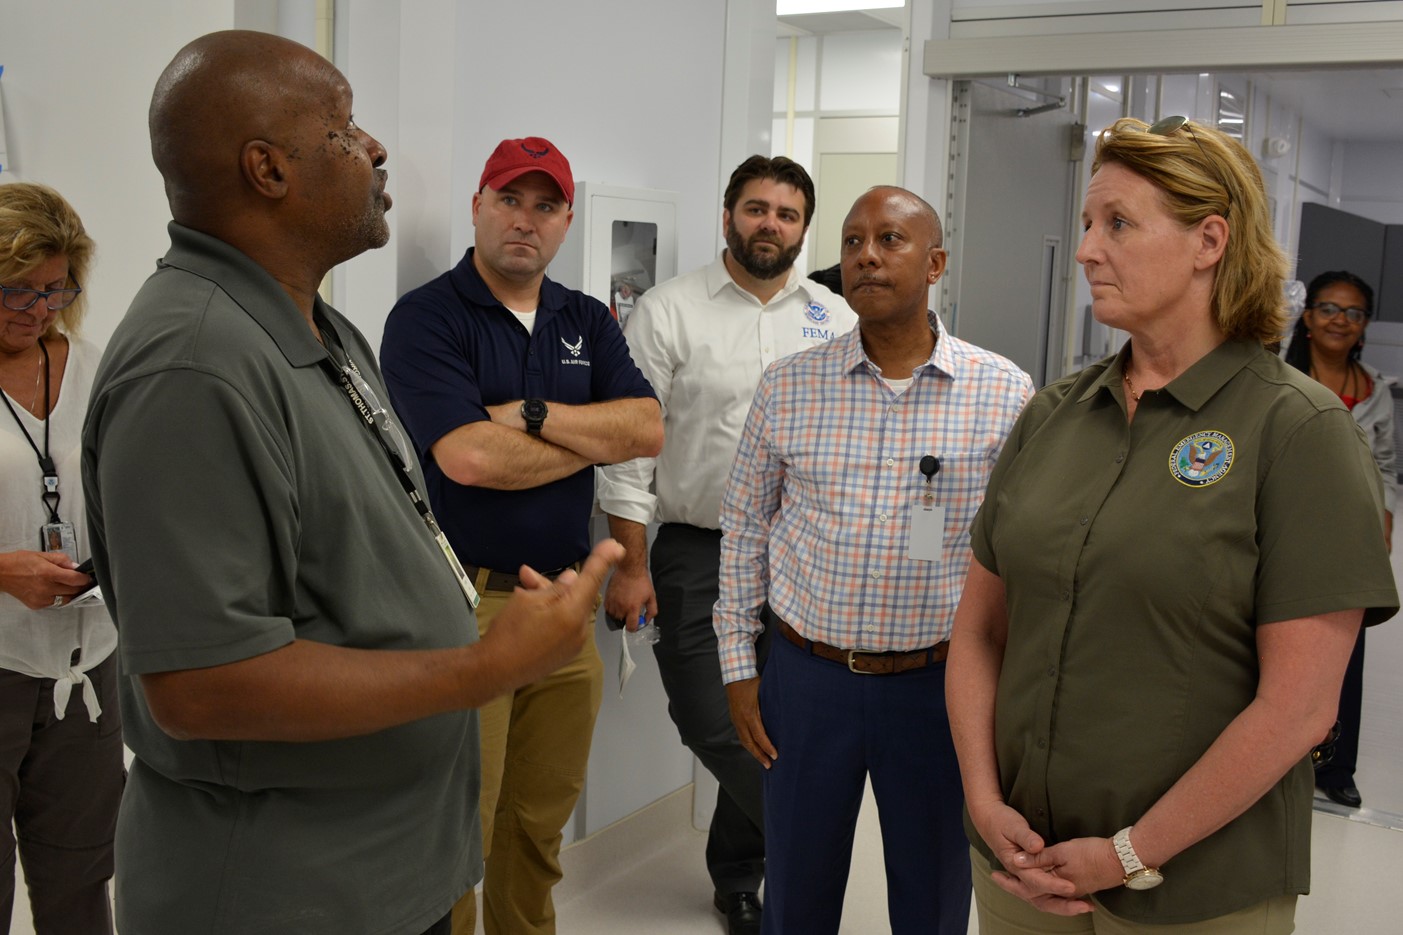 FEMA Administrator Deanne Criswell receives a tour of the Governor Juan F. Luis Hospital’s new temporary facility under construction on St. Croix. The new temporary hospital will provide a new, up-to-date medical facility to ensure continuing hospital care for Virgin Islanders when the current hospital is replaced as part of the Irma/Maria recovery.